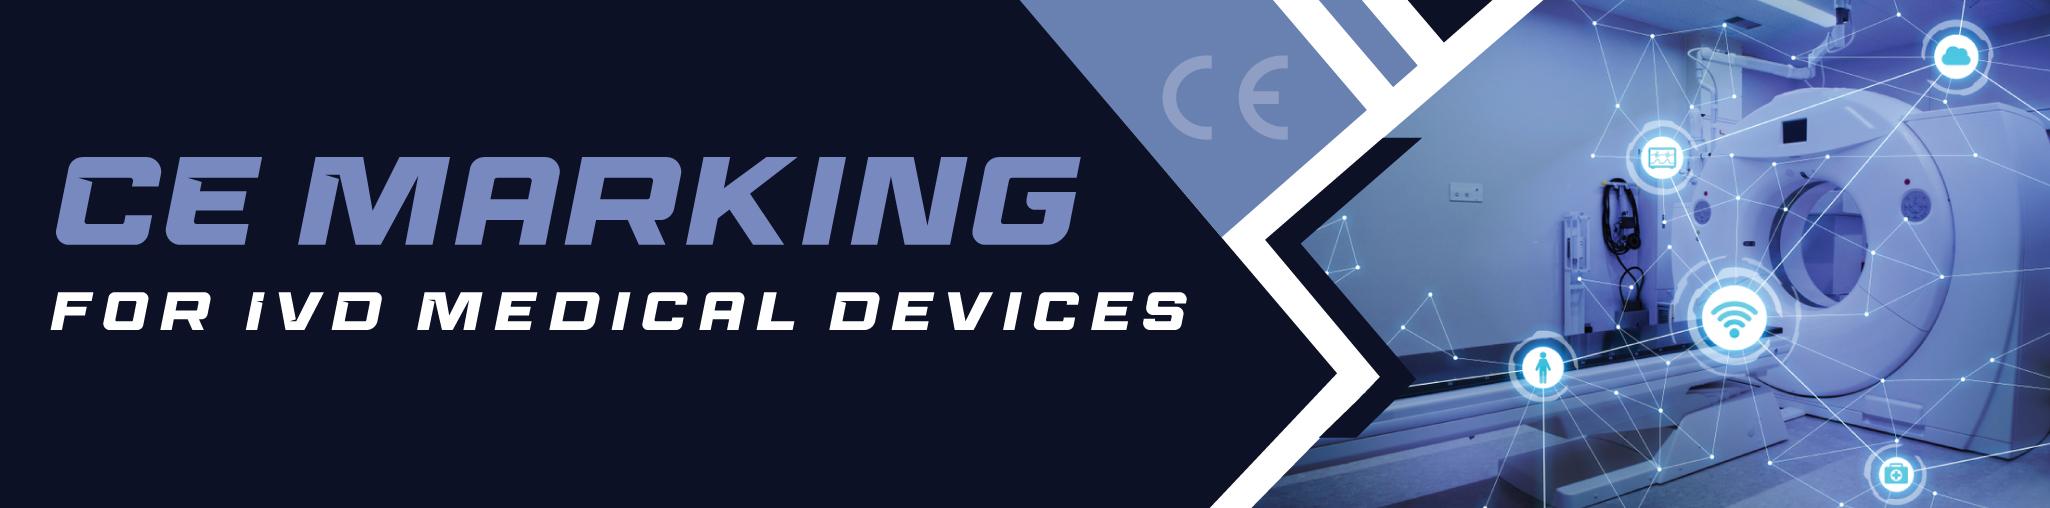 CE Marking For IVD Medical Devices